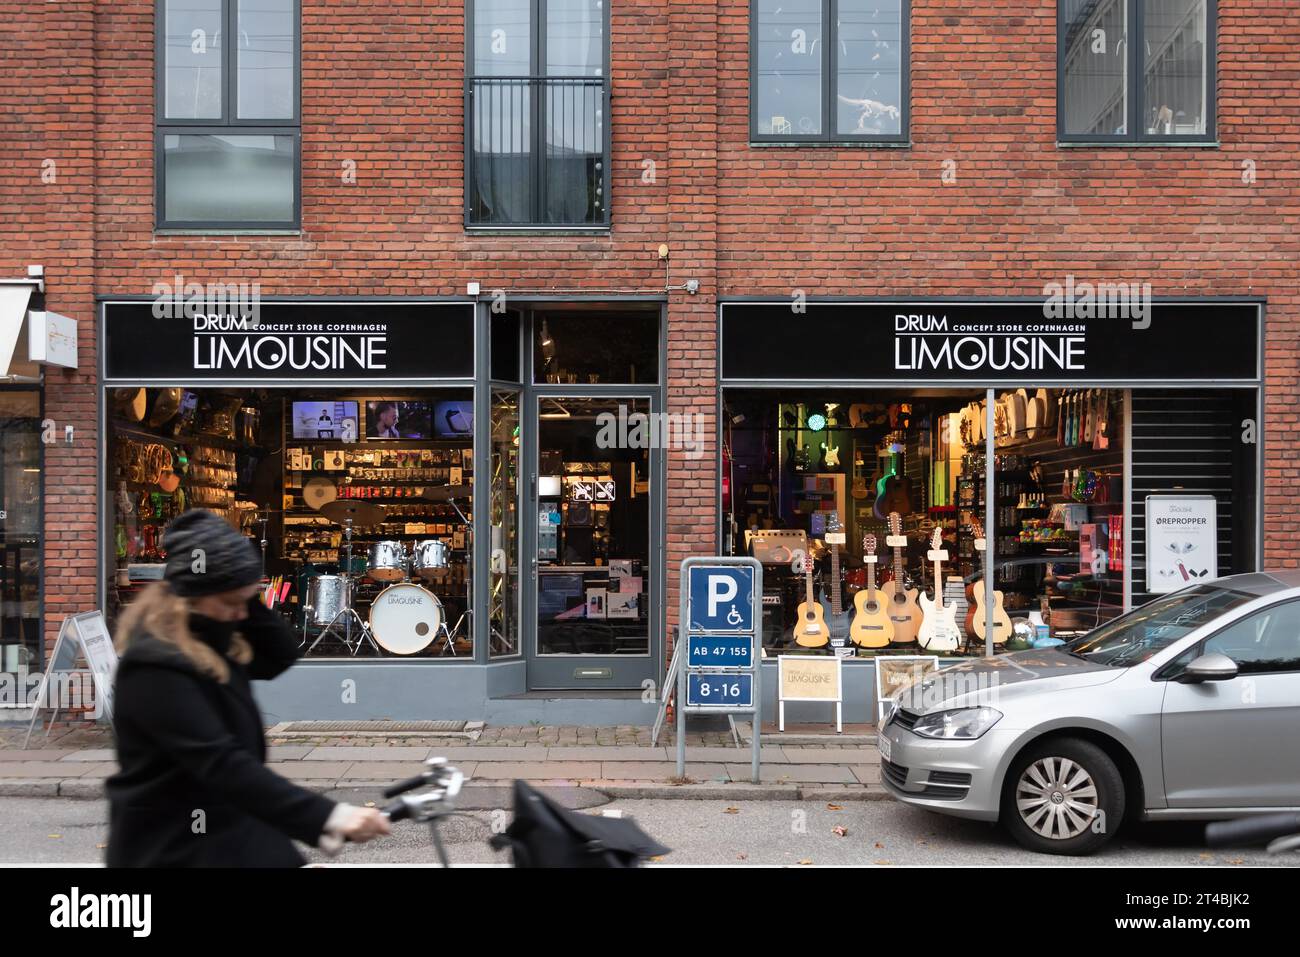 Shop for musical instruments, guitars and drums in the shop window, Copenhagen, Denmark Stock Photo